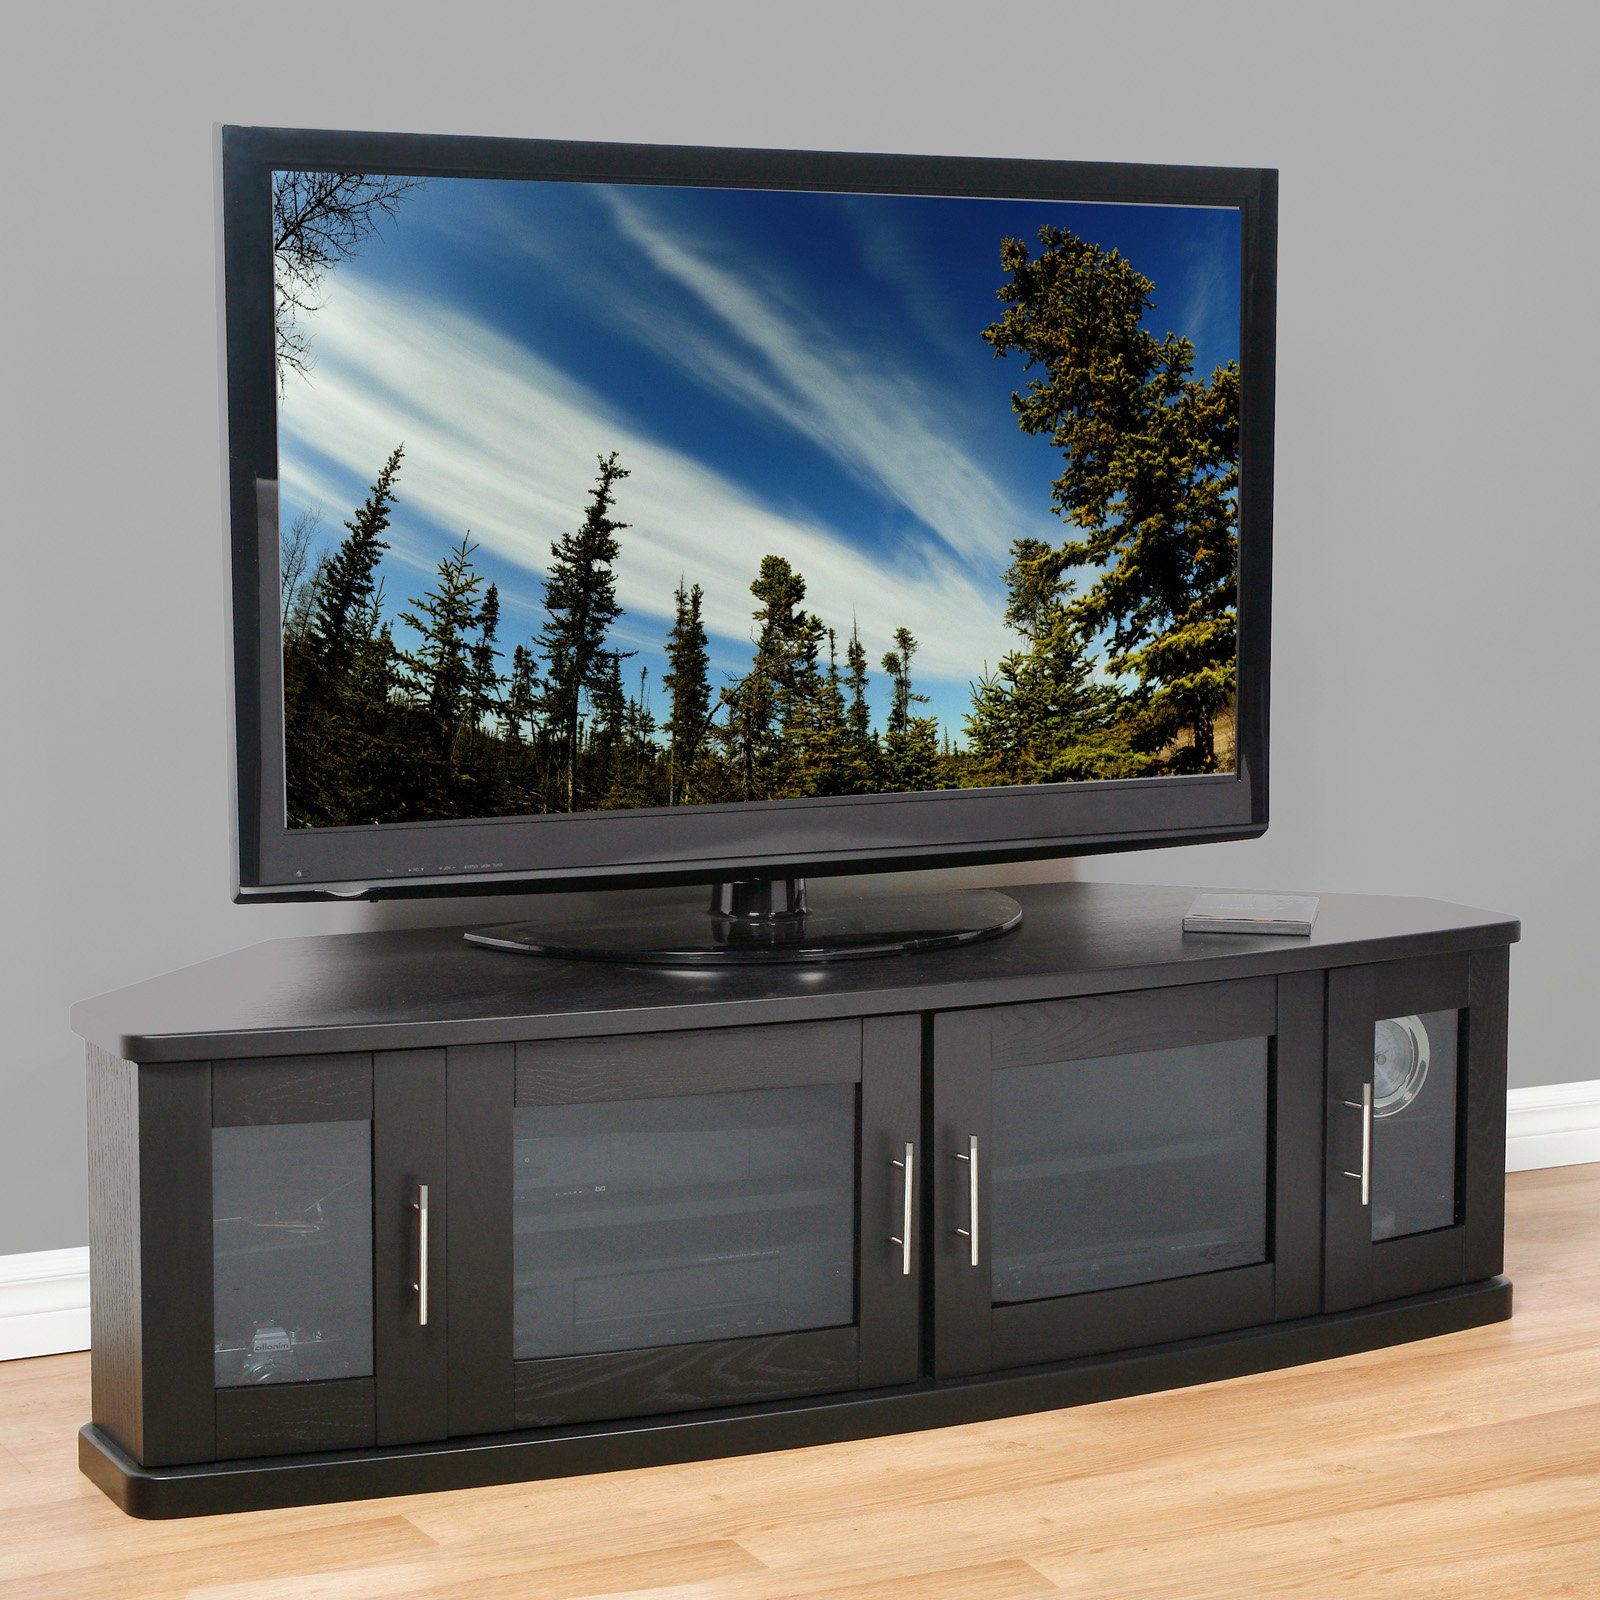 Cornet Tv Stands Throughout Recent Plateau Newport 62 Inch Corner Tv Stand In Black – Walmart (View 15 of 20)